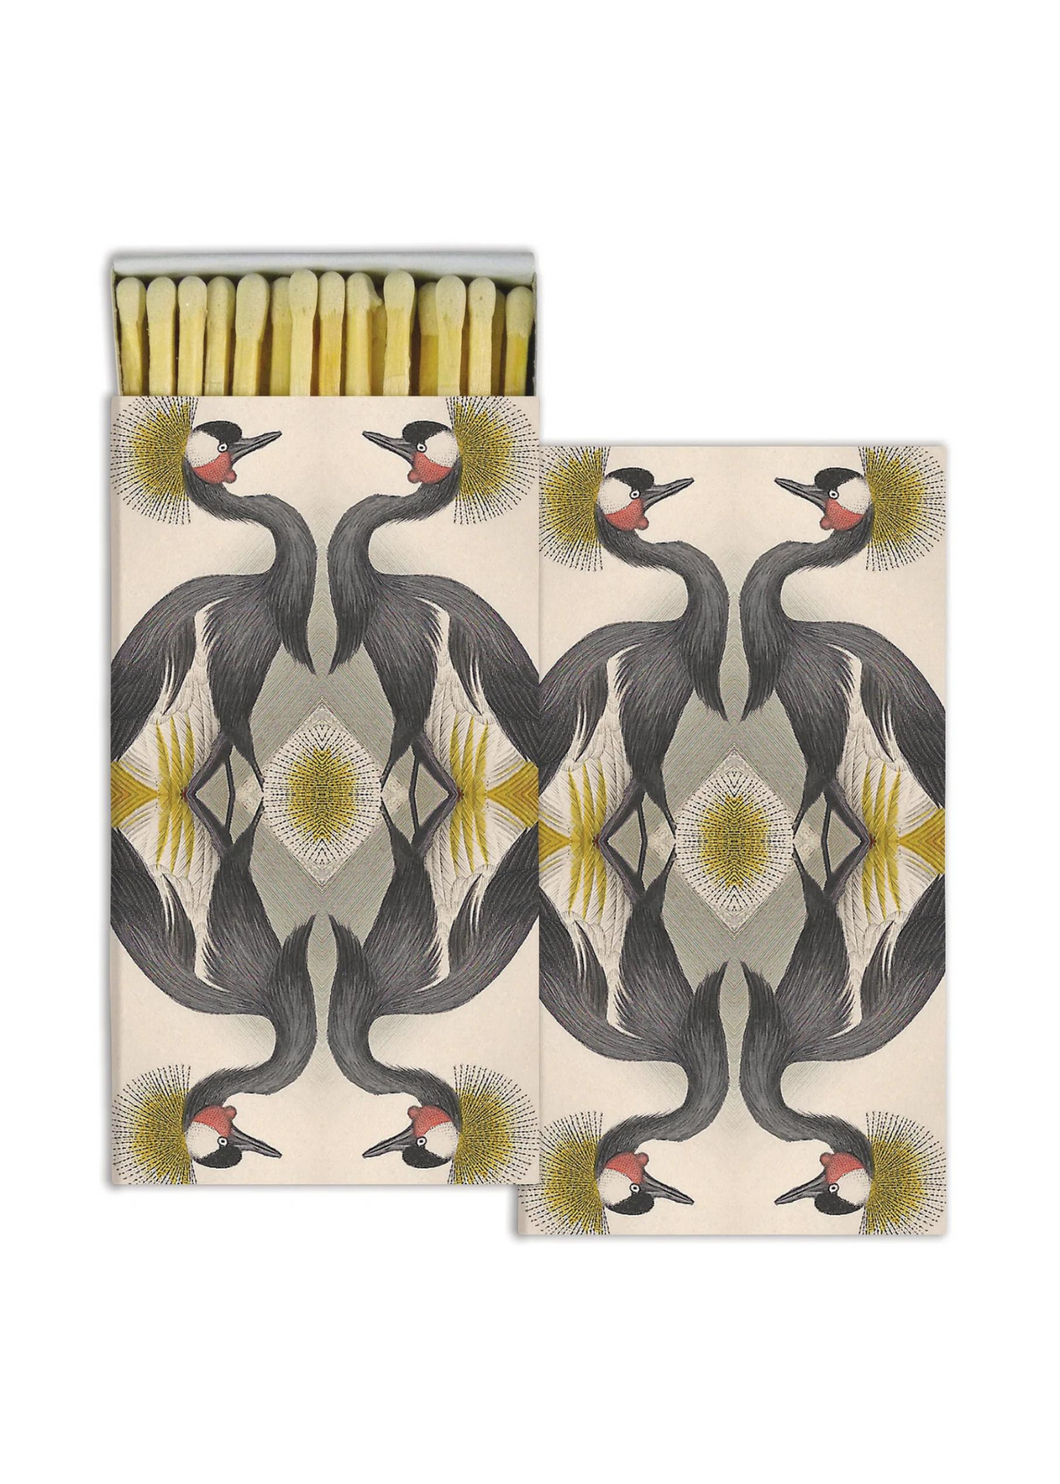 Crested Crane Matches - Tigertree